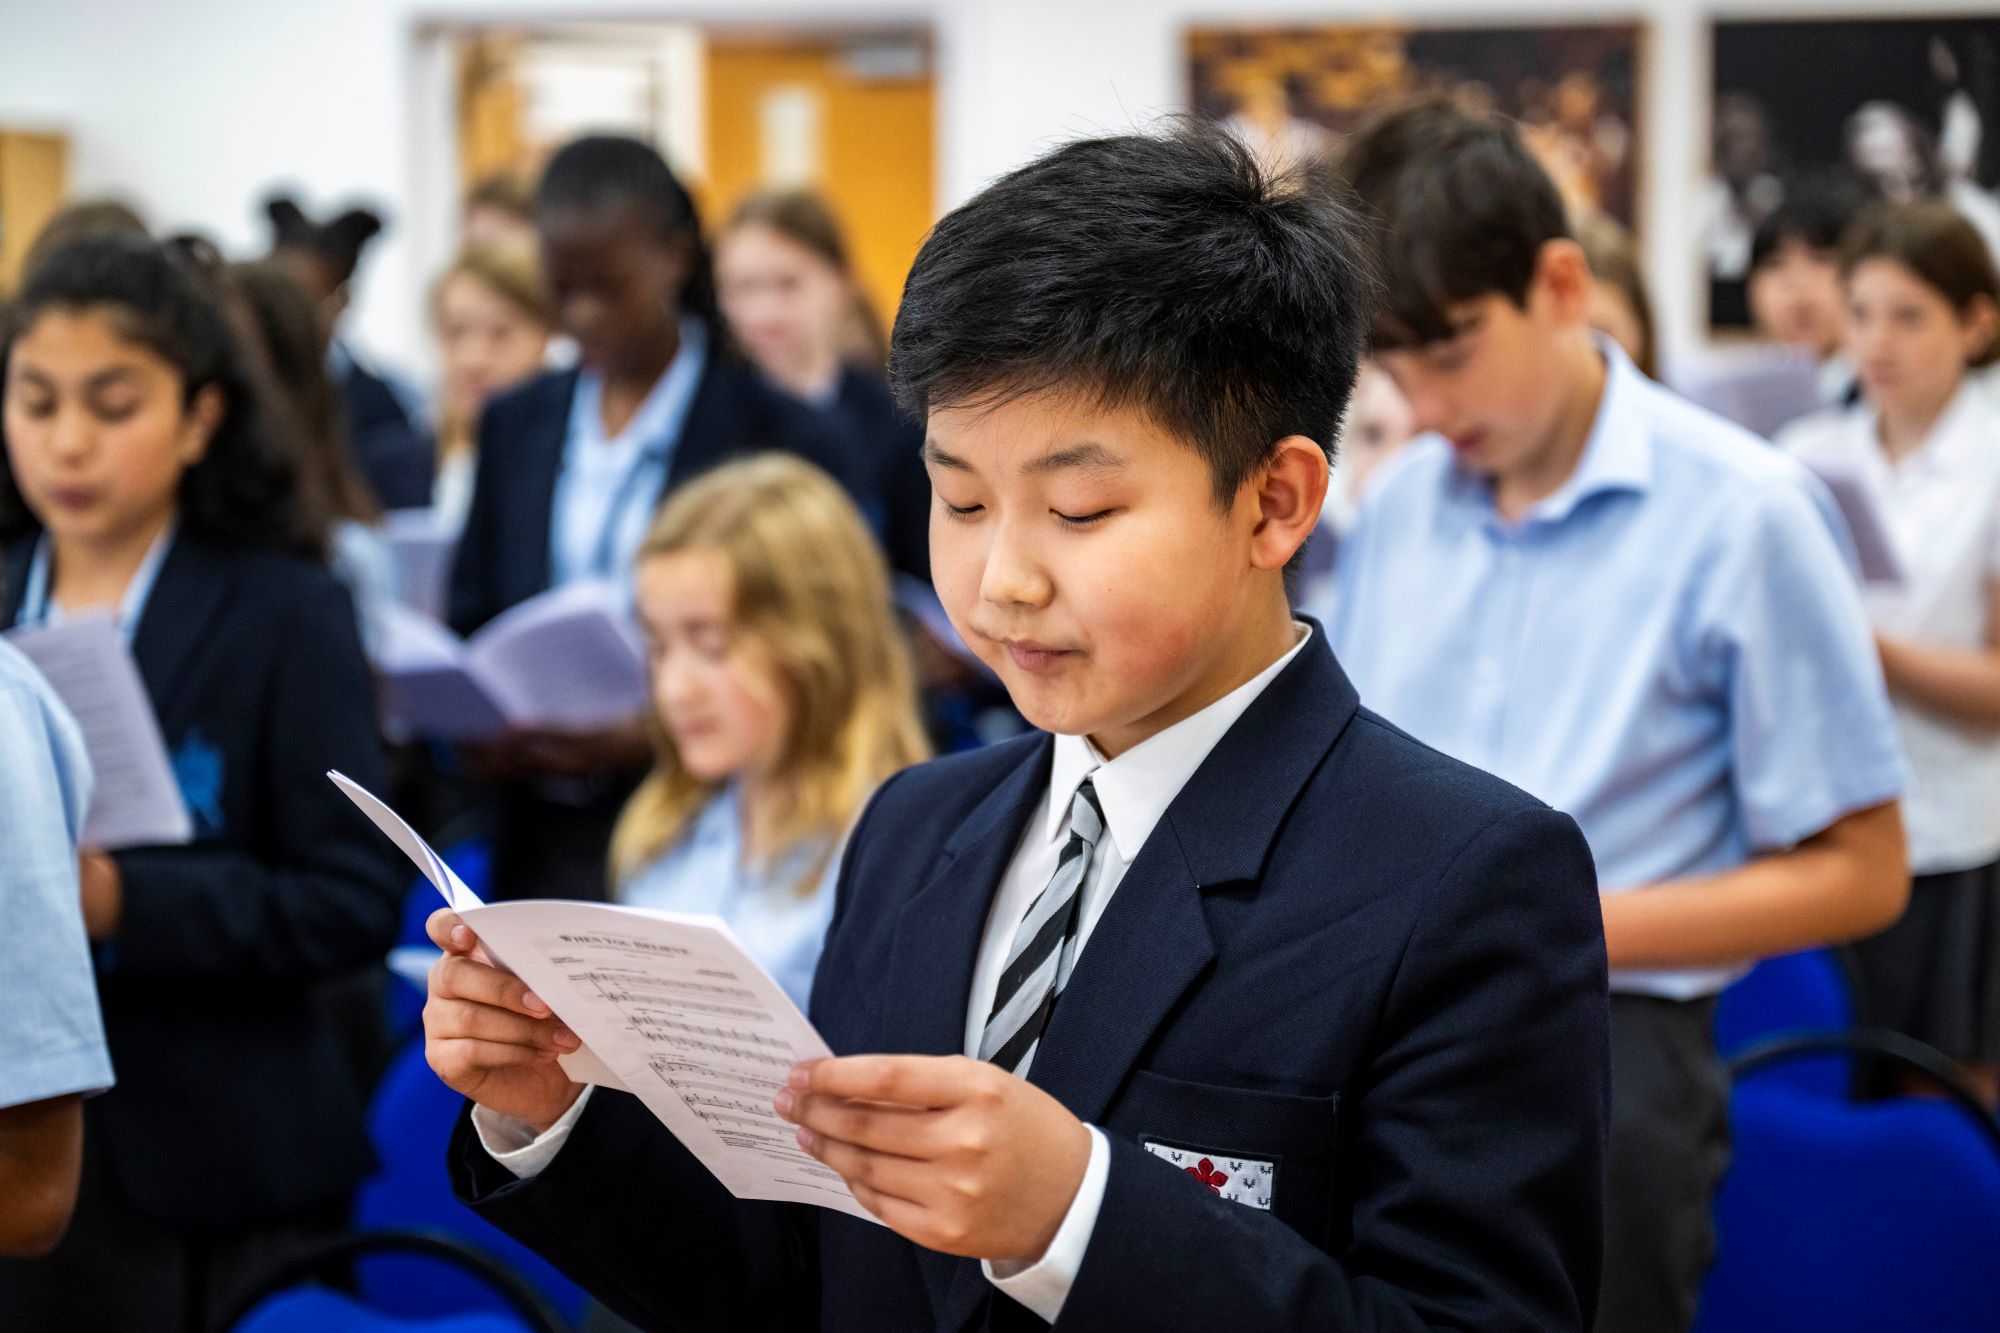 A male Alleyn's pupil looks at a music score during choir practice. Other pupils can be seen in the rows behind him.